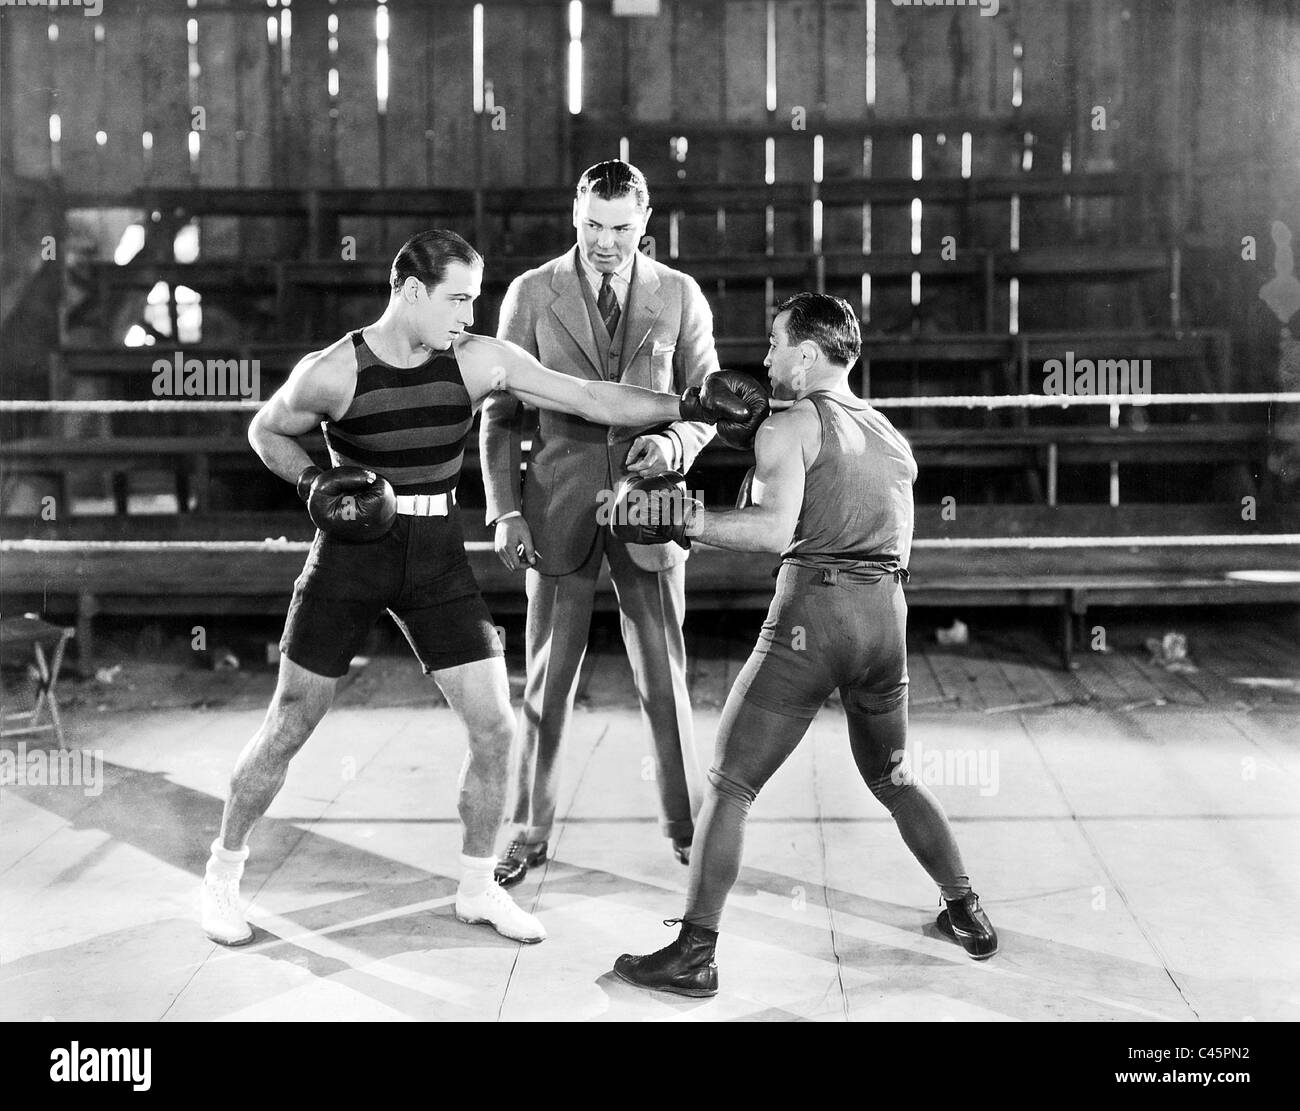 Rudolph Valentino at a boxing lesson Stock Photo